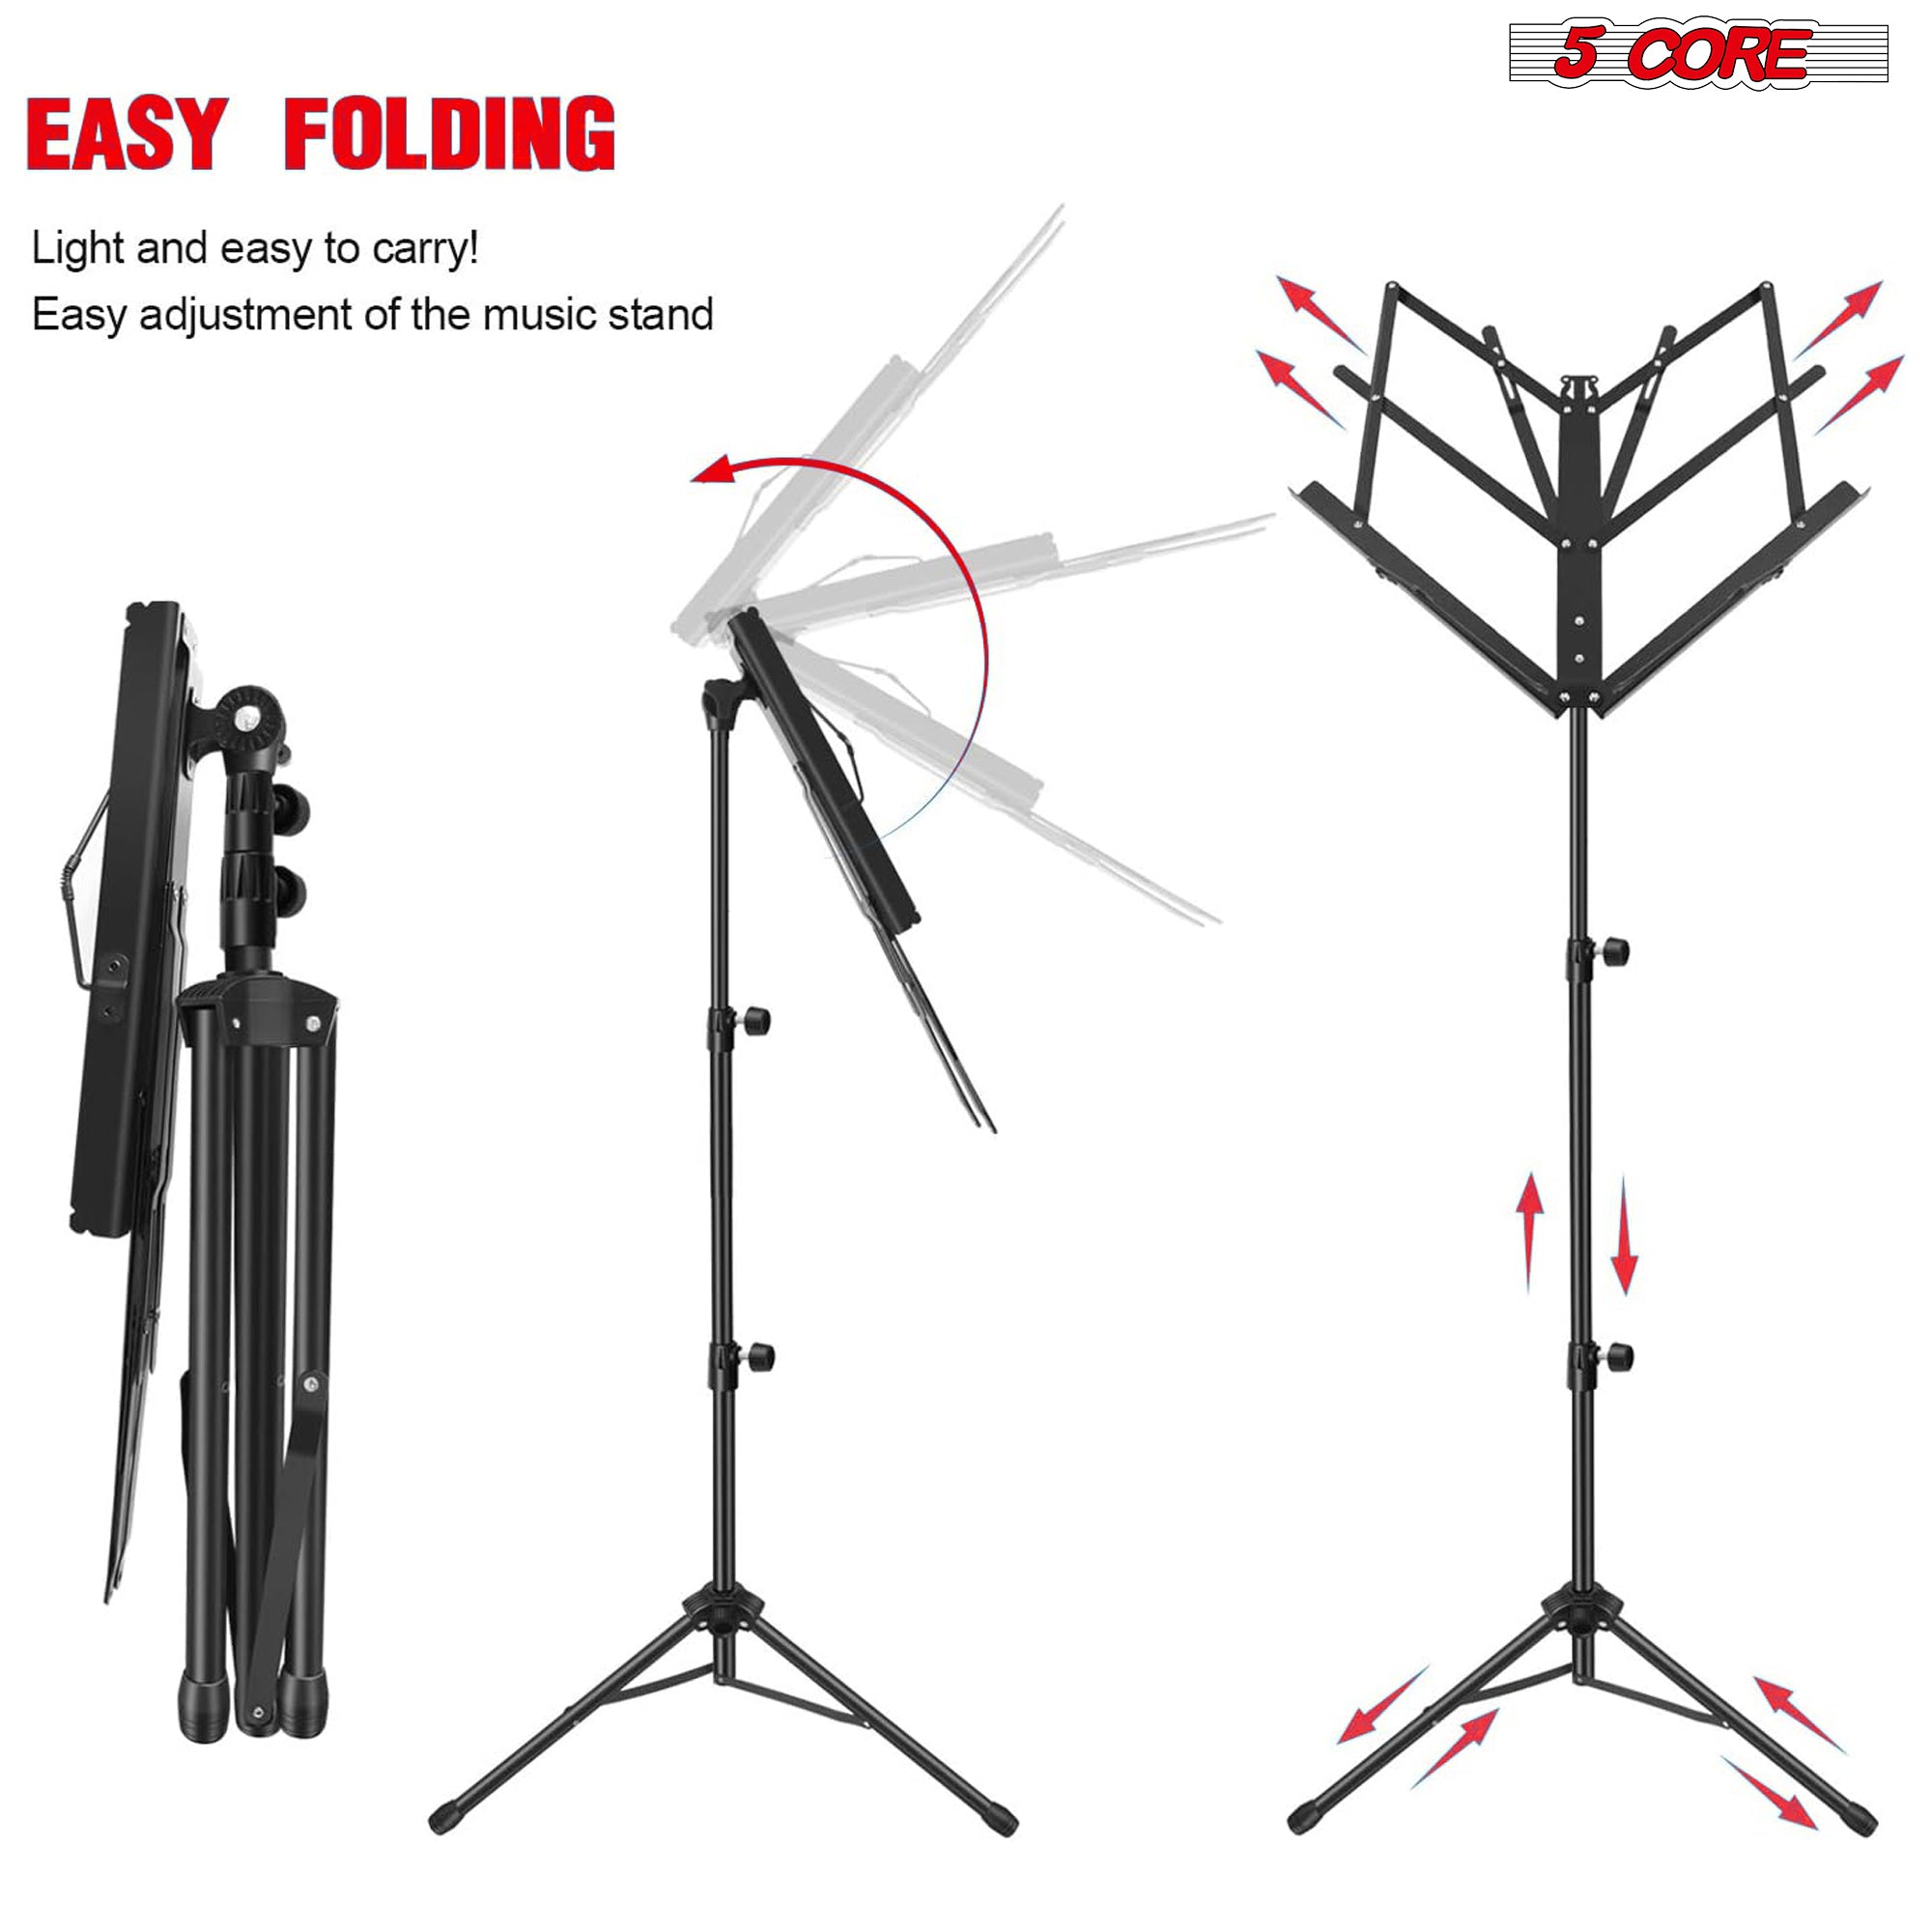 easy folding sheet music stand